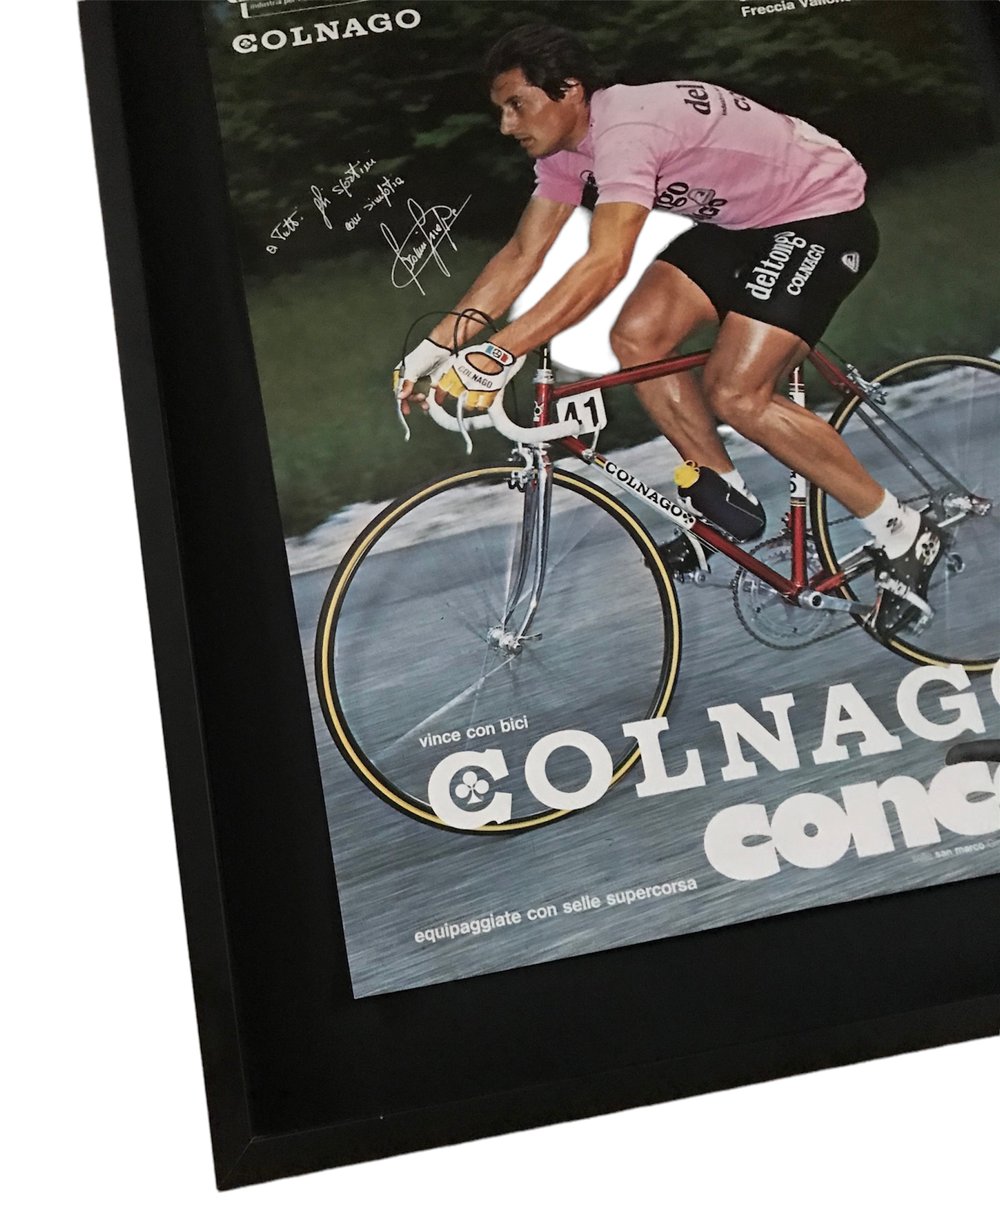 Advertising poster of Giuseppe Saronni for the Concor and Colnago brands